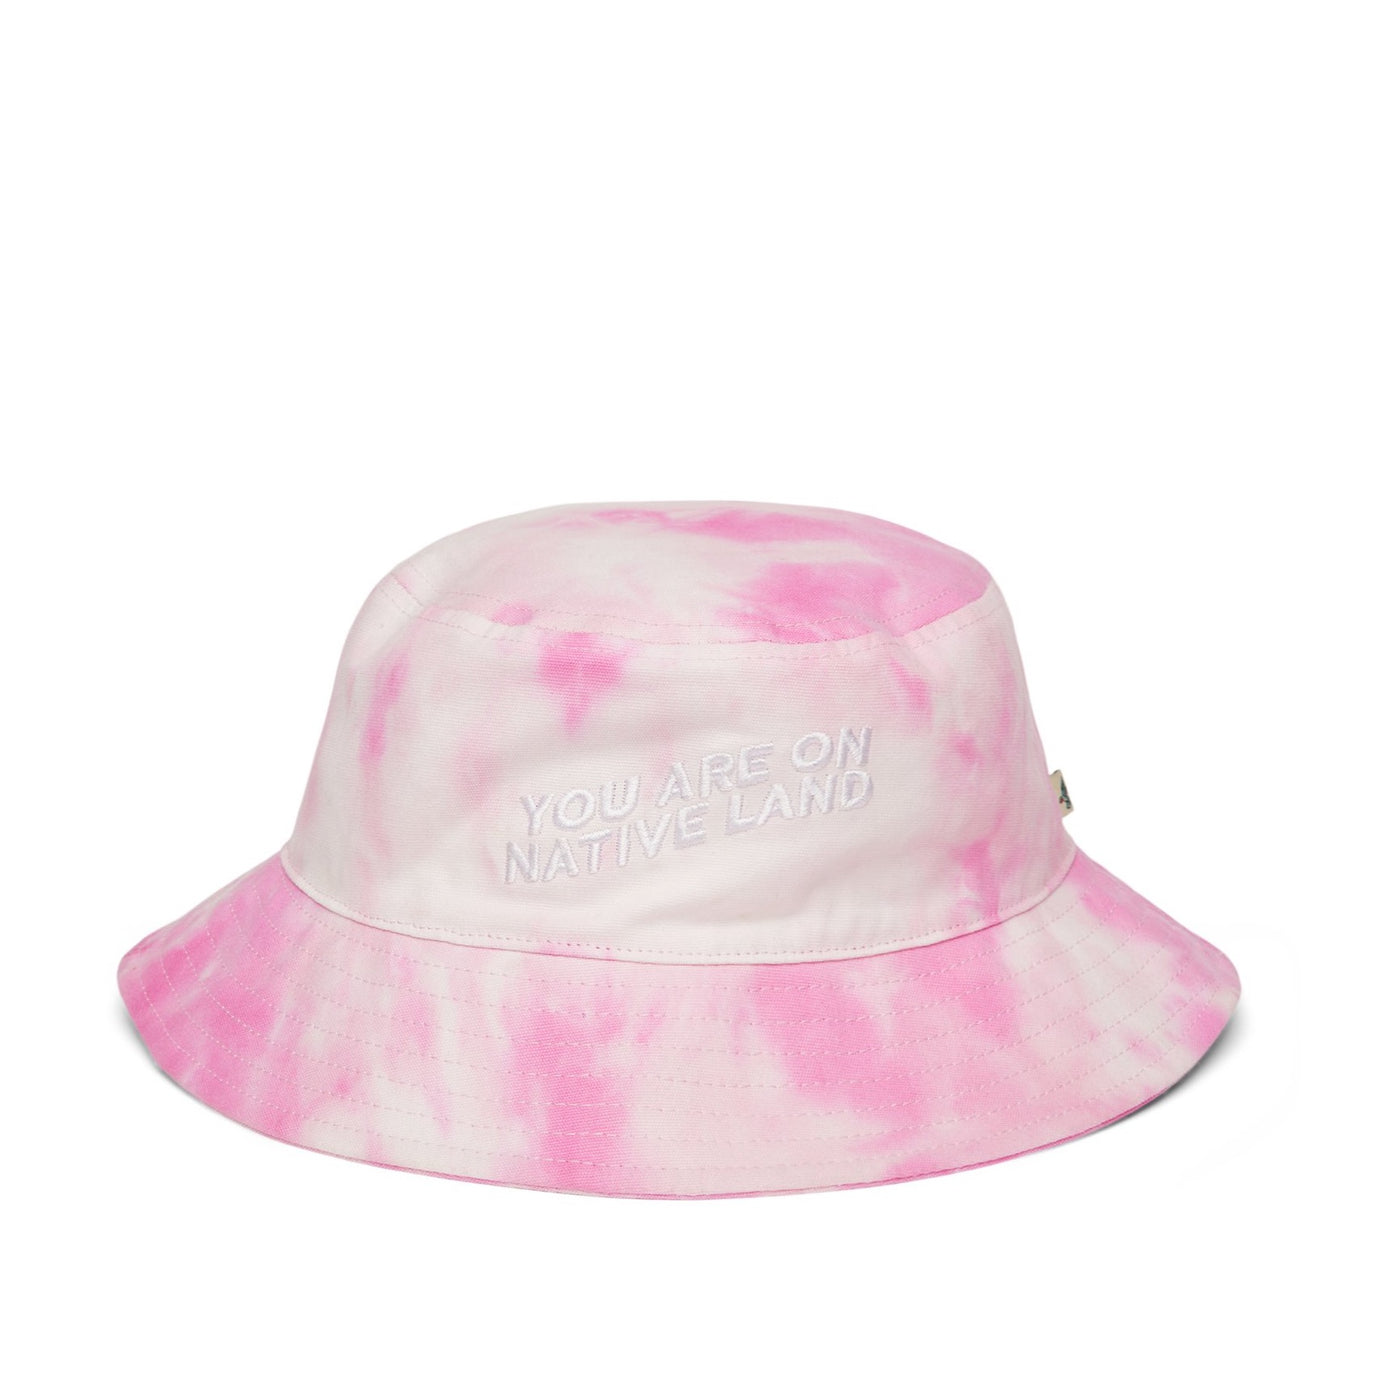 'YOU ARE ON NATIVE LAND'  BUCKET HAT - PINK TIE DYE